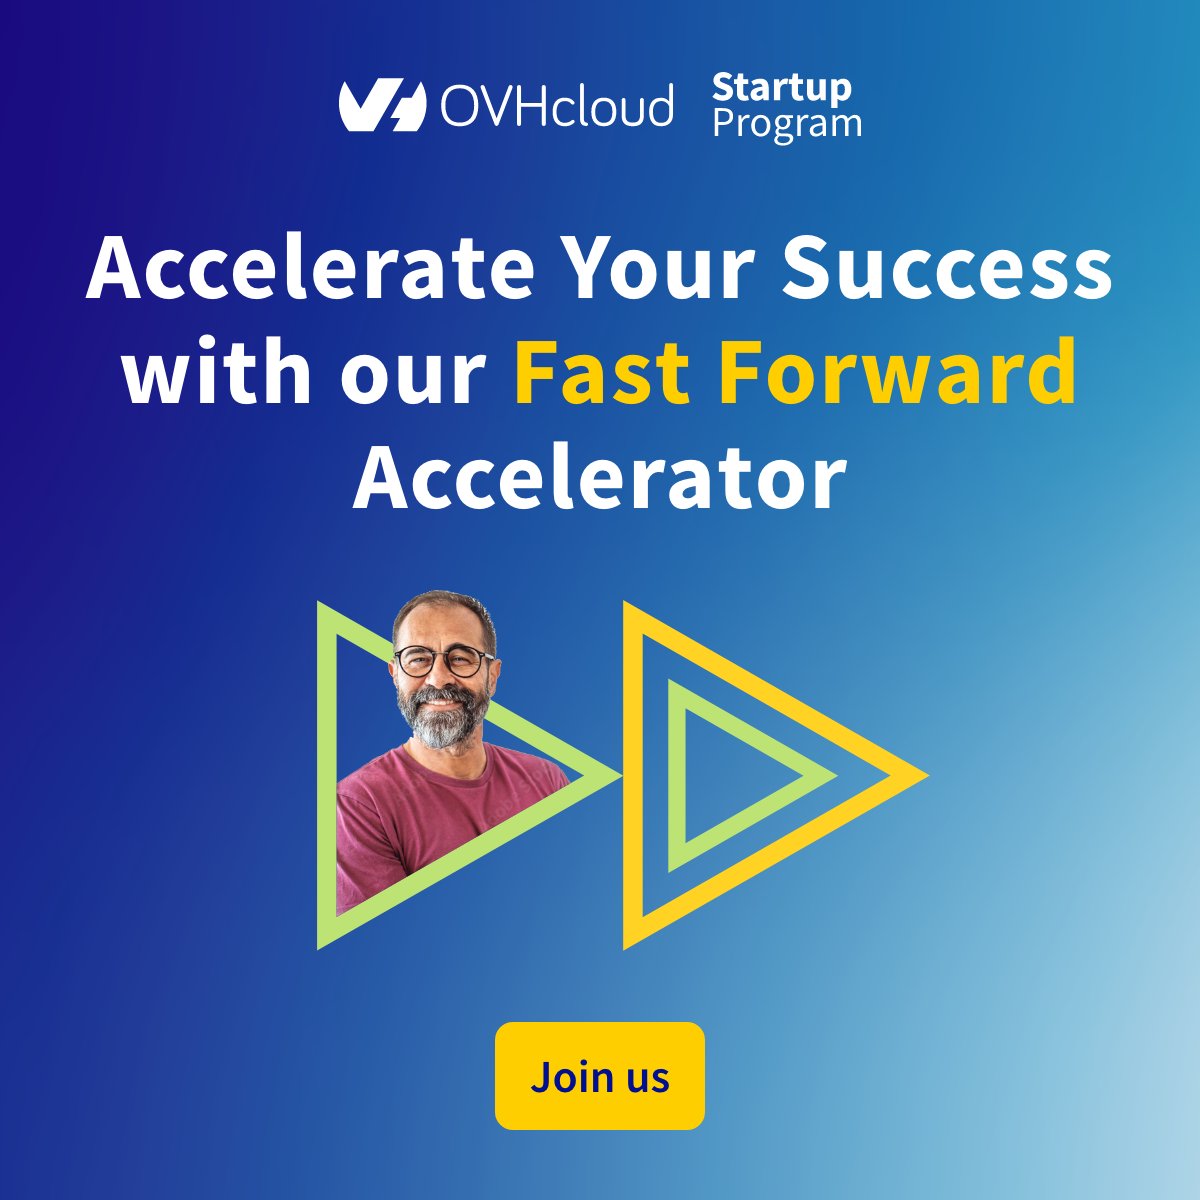 ⚡️Get the support you need to skyrocket your tech startup. From personalised guidance to tech consultations, our accelerator program #FastForward has it all. Find out more : startup.ovhcloud.com/en-ie/accelera… #startup #scaleup